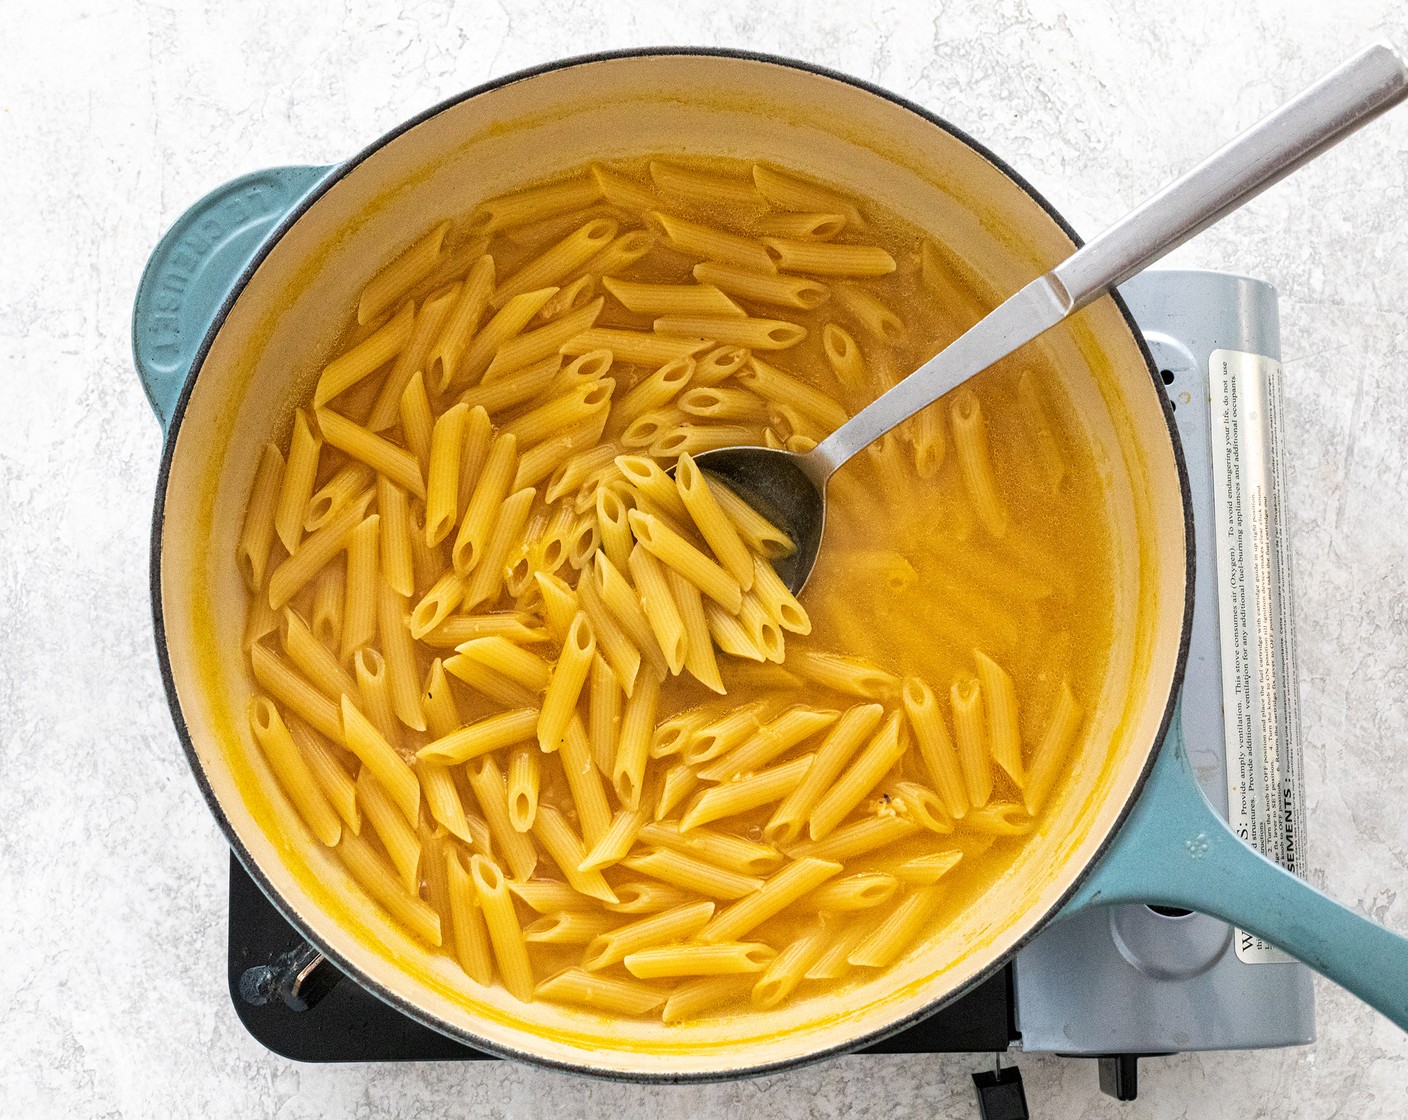 step 5 Add Penne Pasta (8 oz) and Vegetable Stock (4 cups) to the pot. Bring the liquid to a boil over high heat. Cook and frequently stir until the pasta is tender, and only a small amount of the liquid remains to make a light sauce, about 15 to 17 minutes. Turn off the heat.